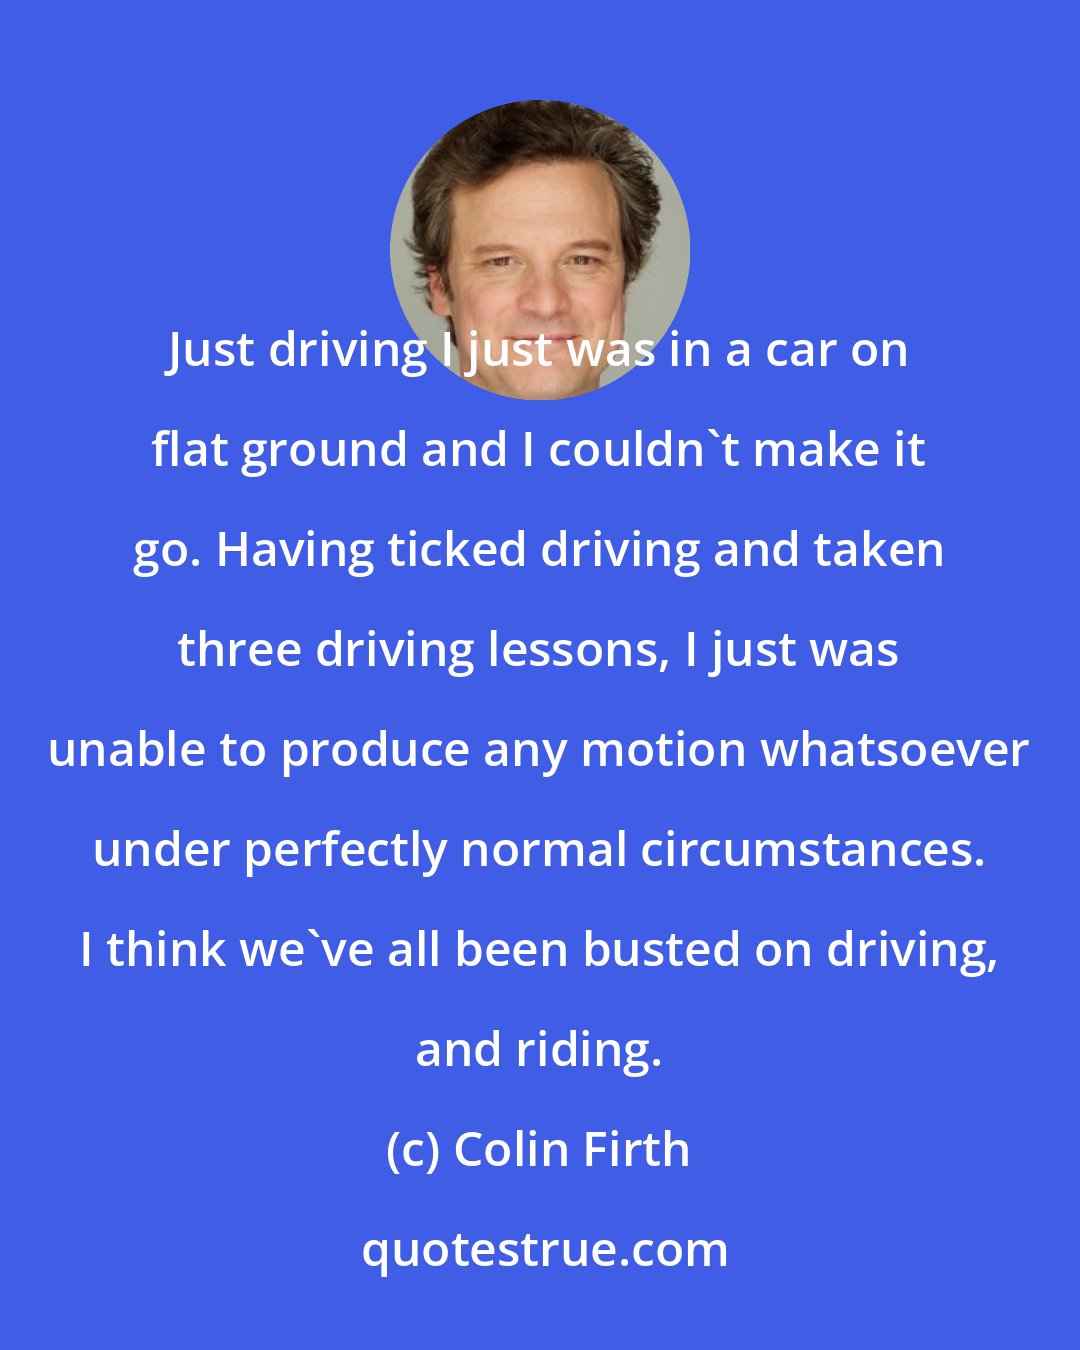 Colin Firth: Just driving I just was in a car on flat ground and I couldn't make it go. Having ticked driving and taken three driving lessons, I just was unable to produce any motion whatsoever under perfectly normal circumstances. I think we've all been busted on driving, and riding.